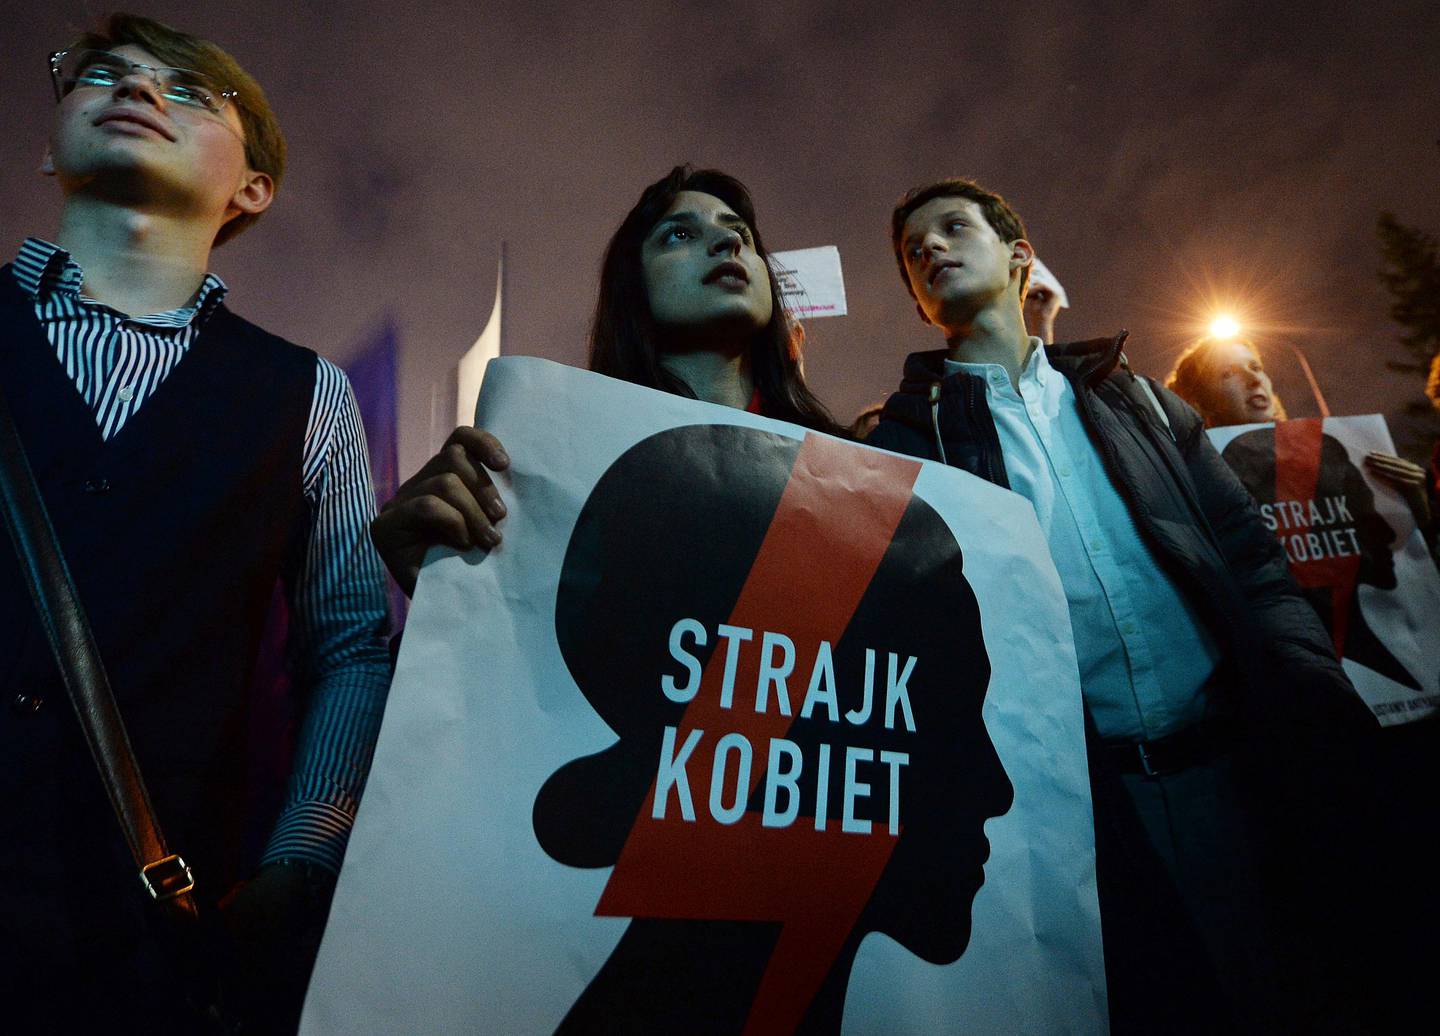 People attend a protest against a bill that would criminalize "the promotion of underage sex" in front of the Parliament in Warsaw, Poland, Wednesday, Oct. 16, 2019. The poster reads: "Women Strike". (AP Photo/Czarek Sokolowski)